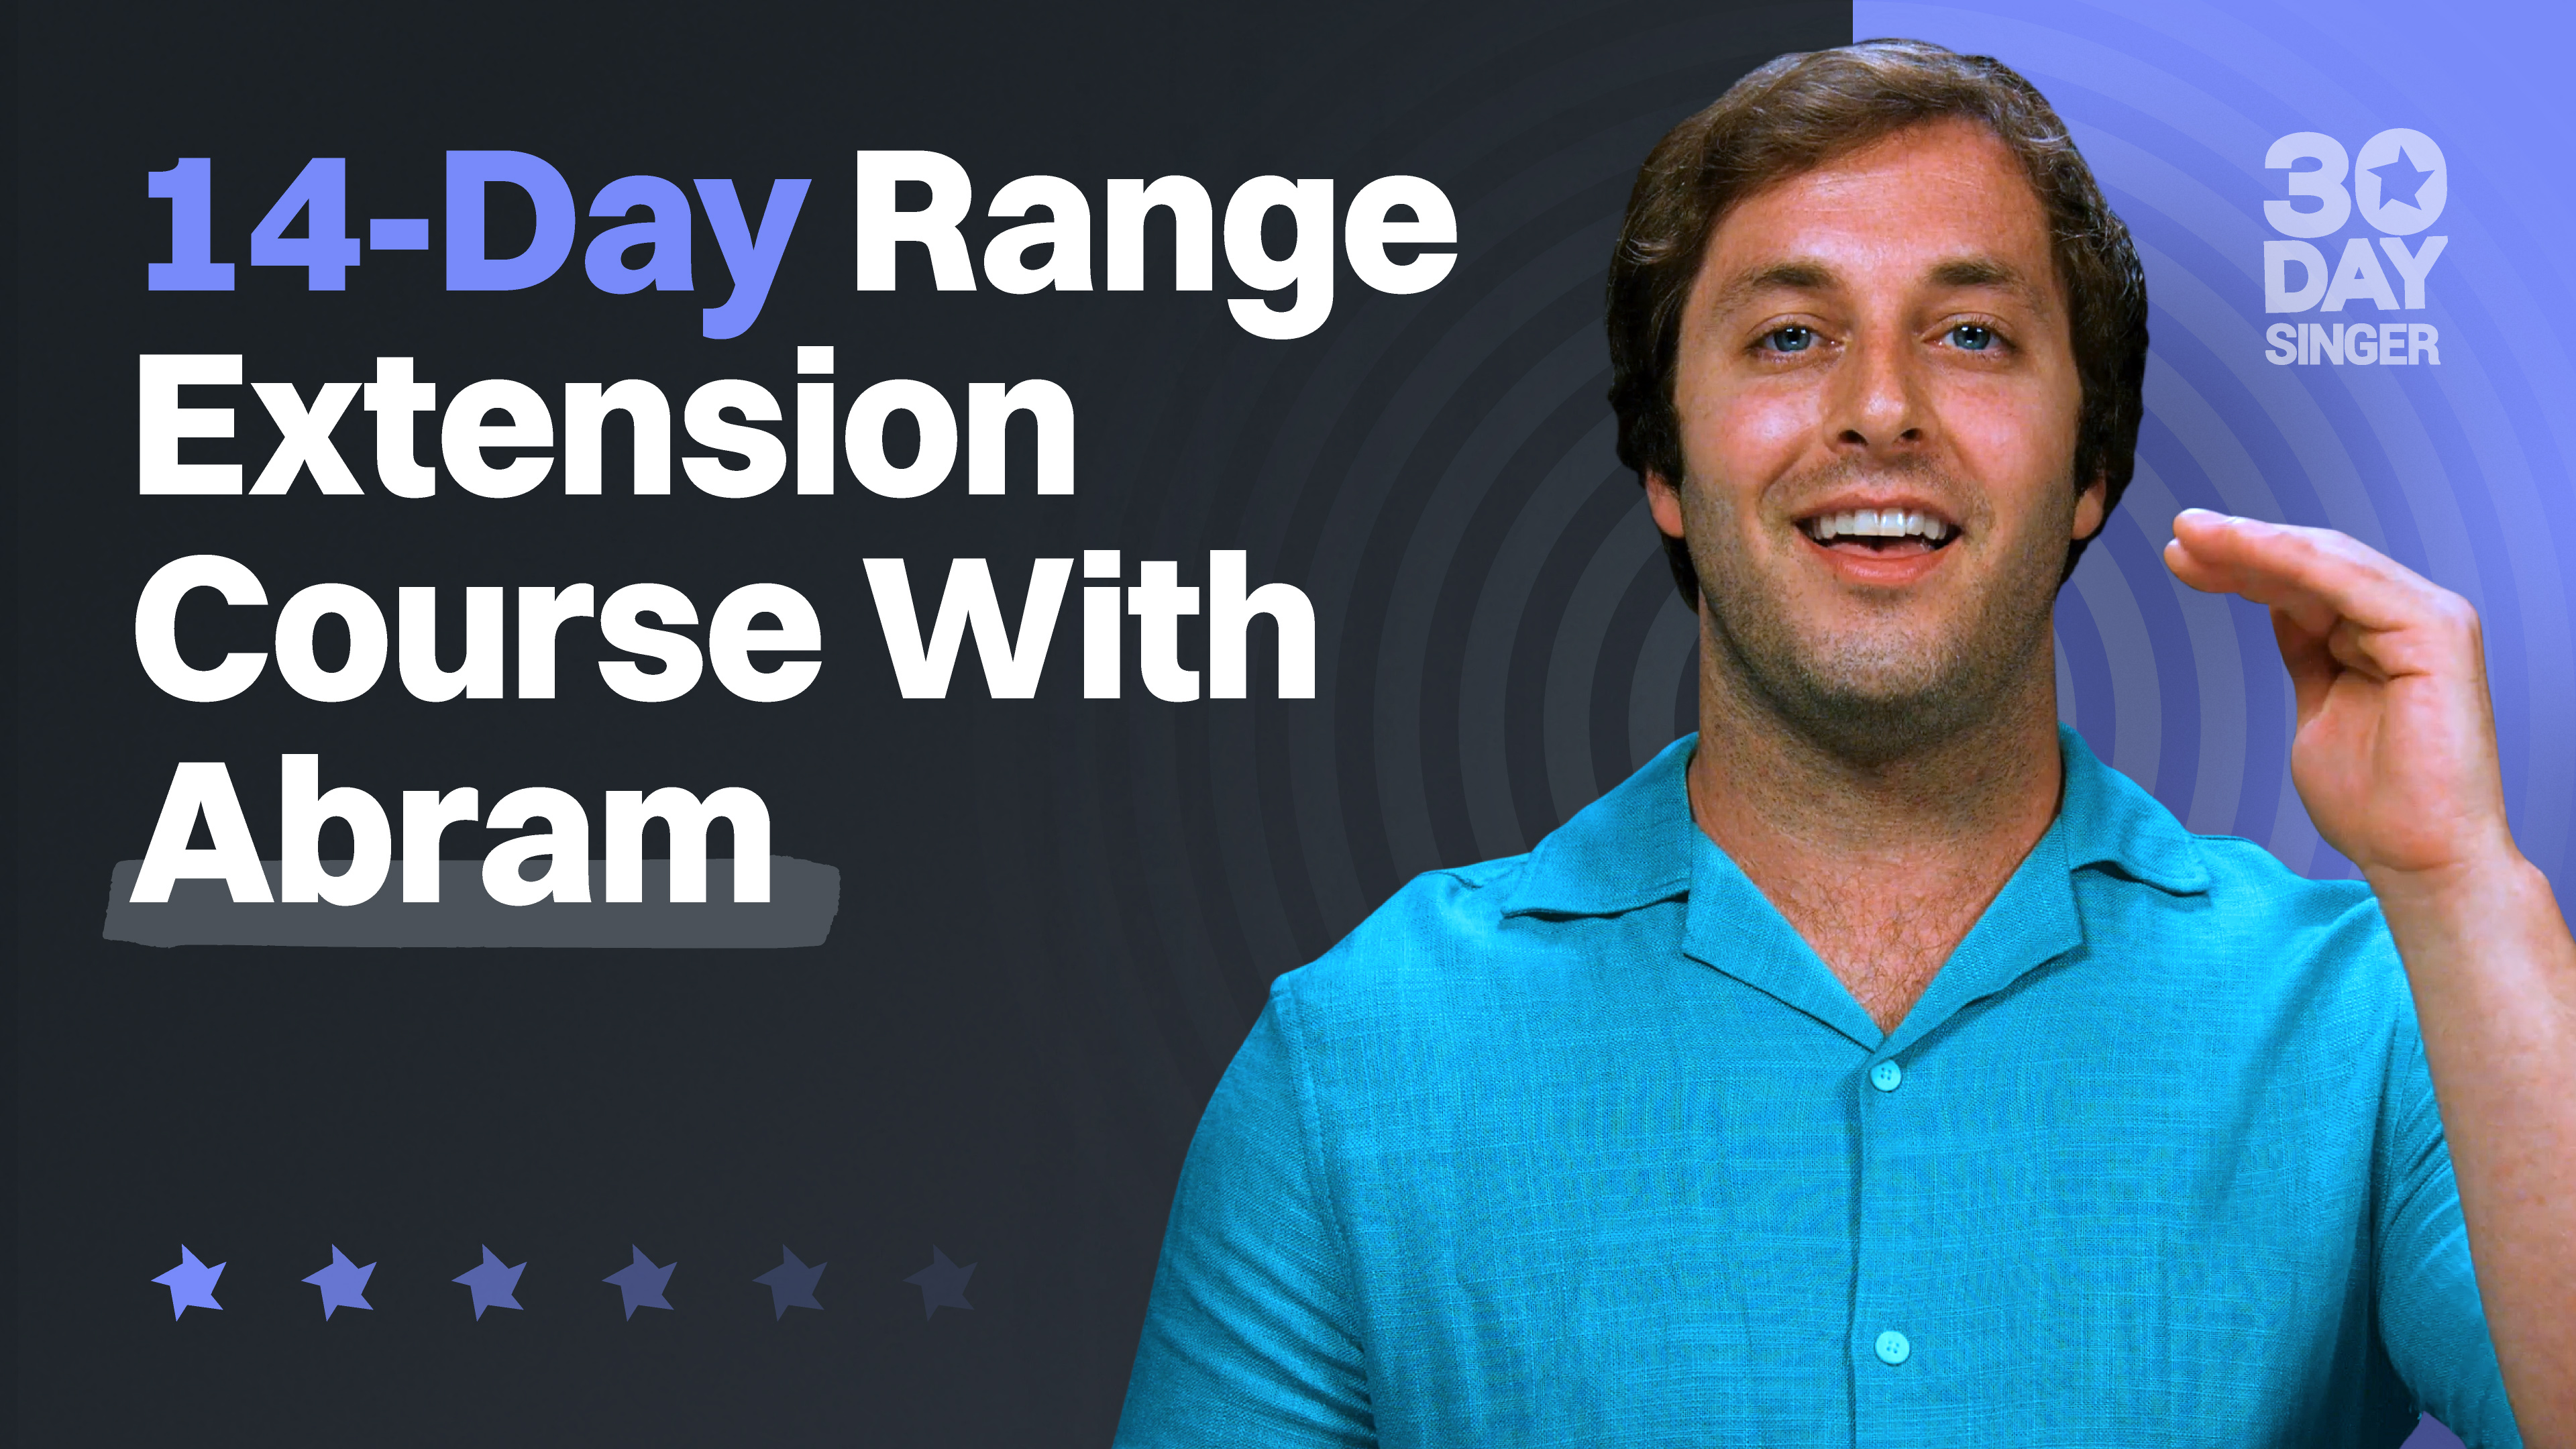 14-Day Range Extension Course With Abram